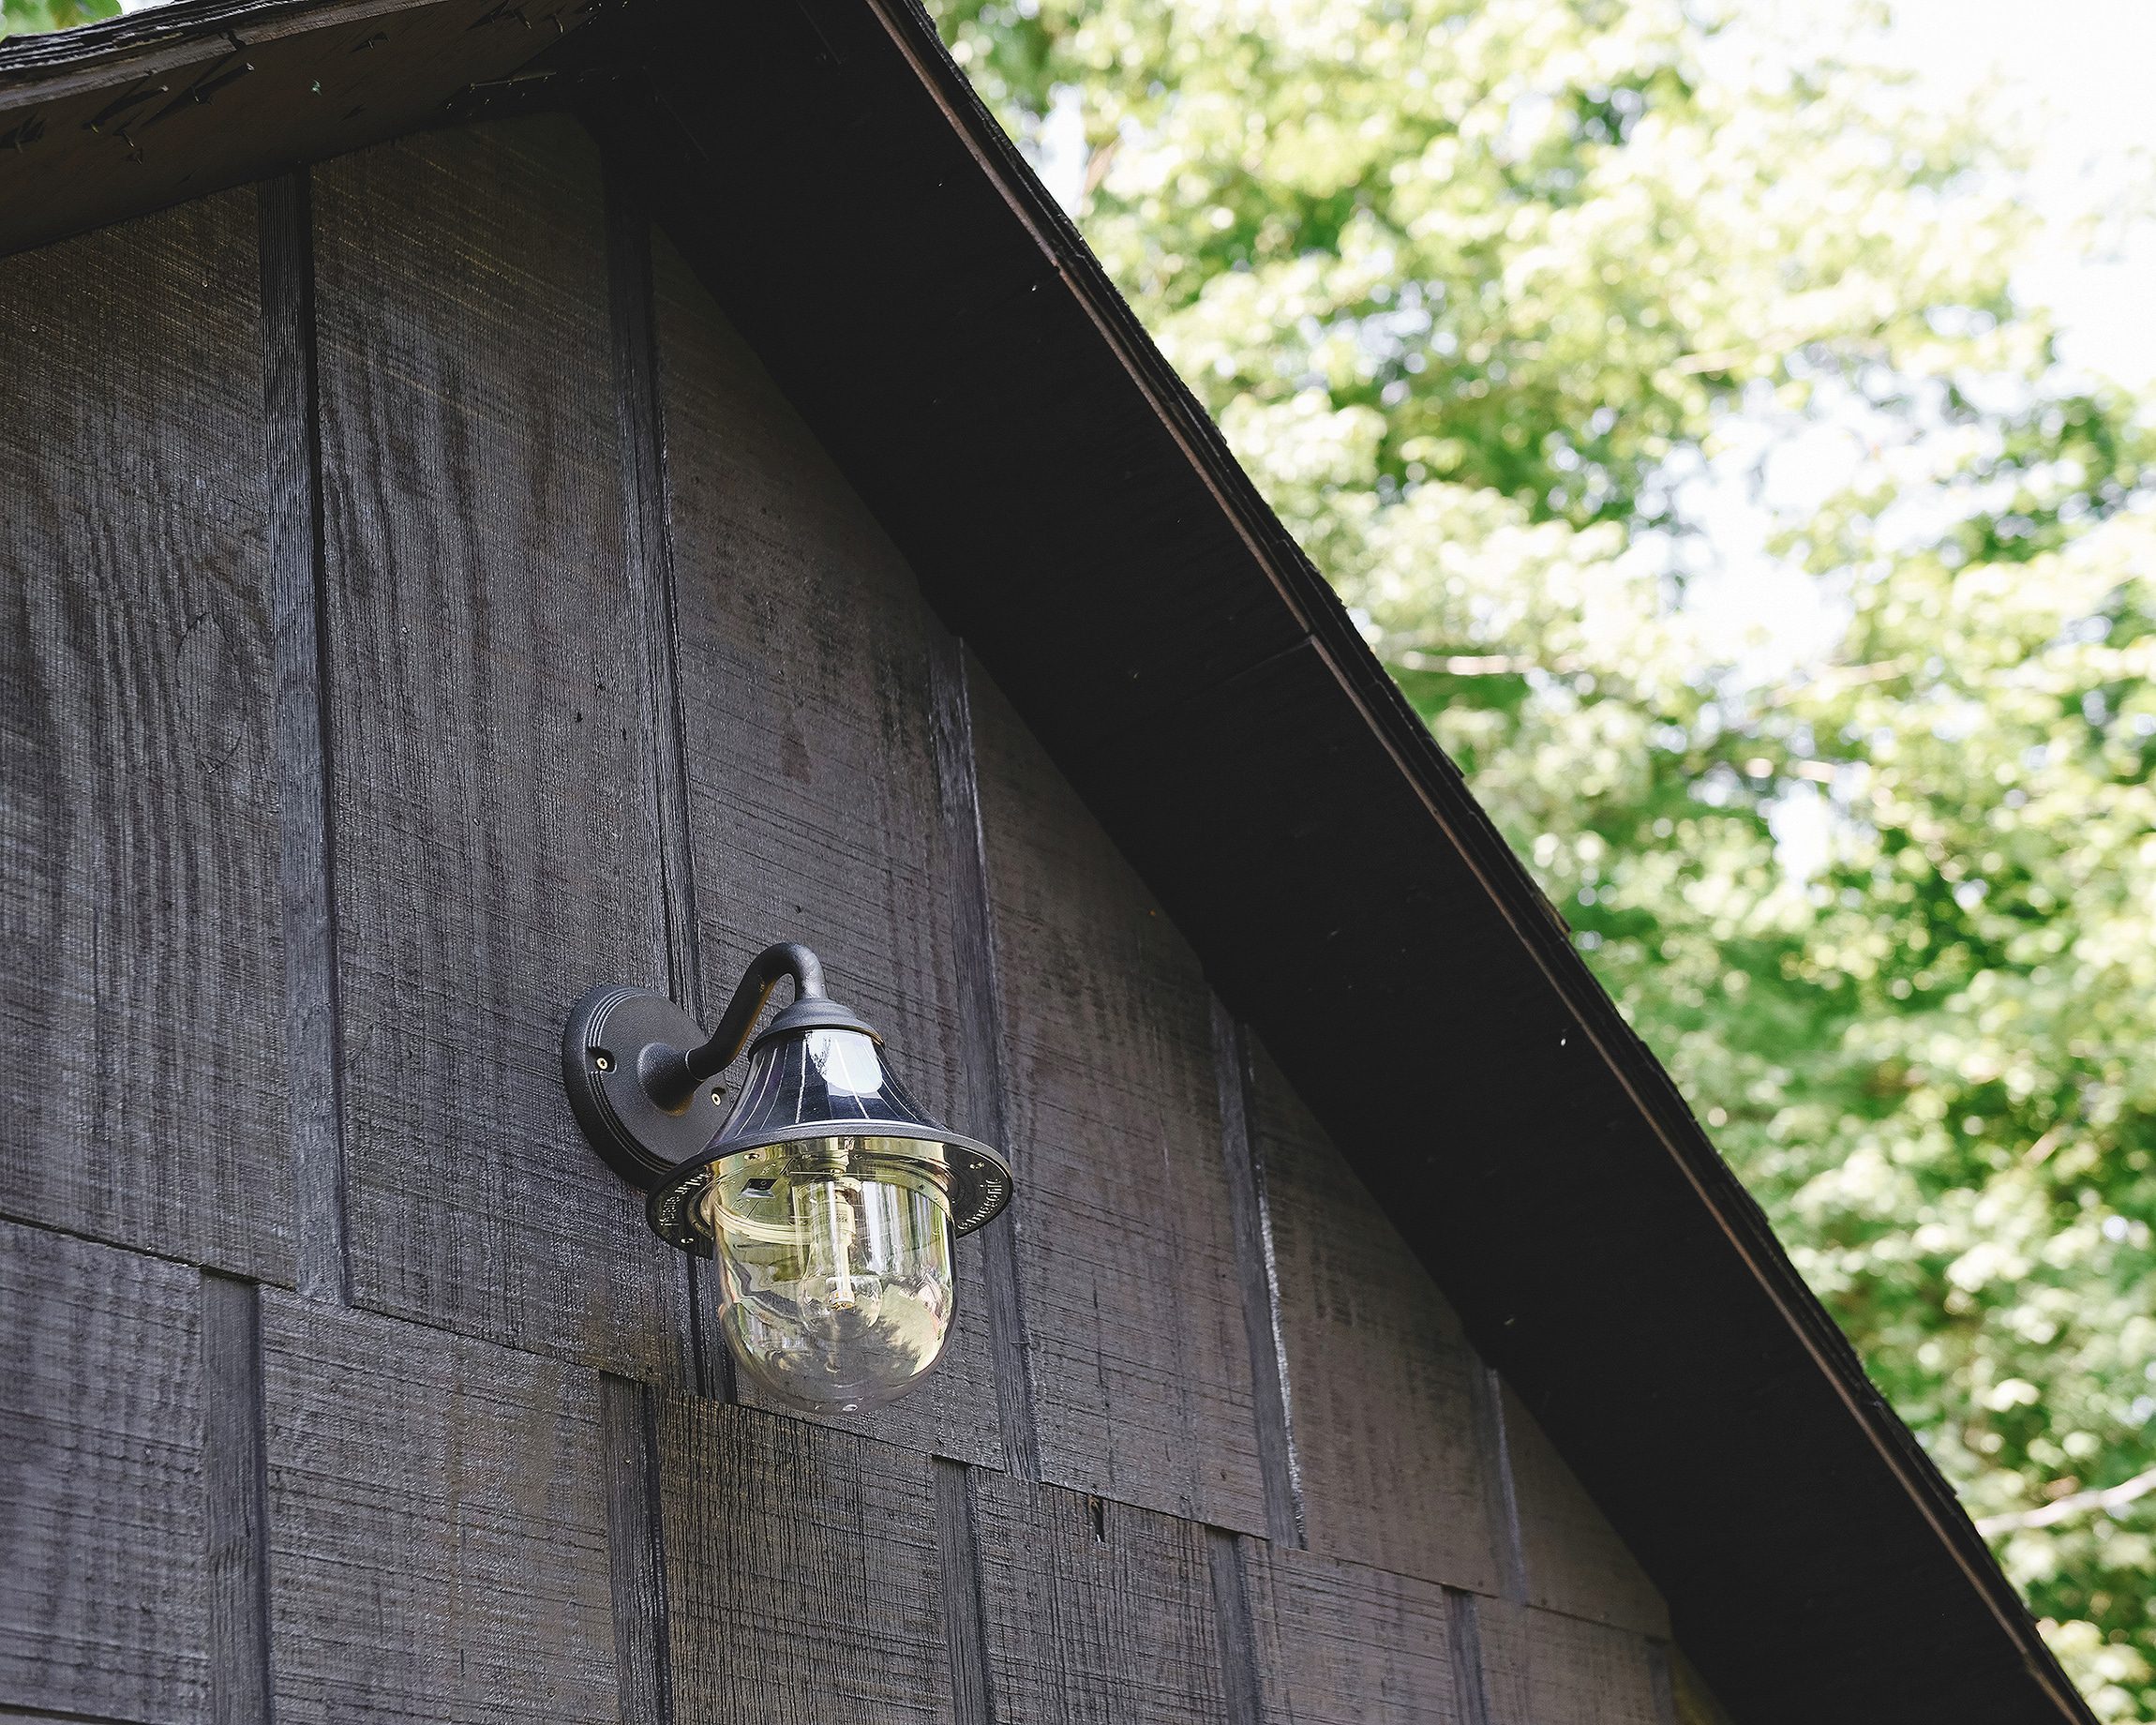 A close up of our solar light fixture during the say | via Yellow Brick Home